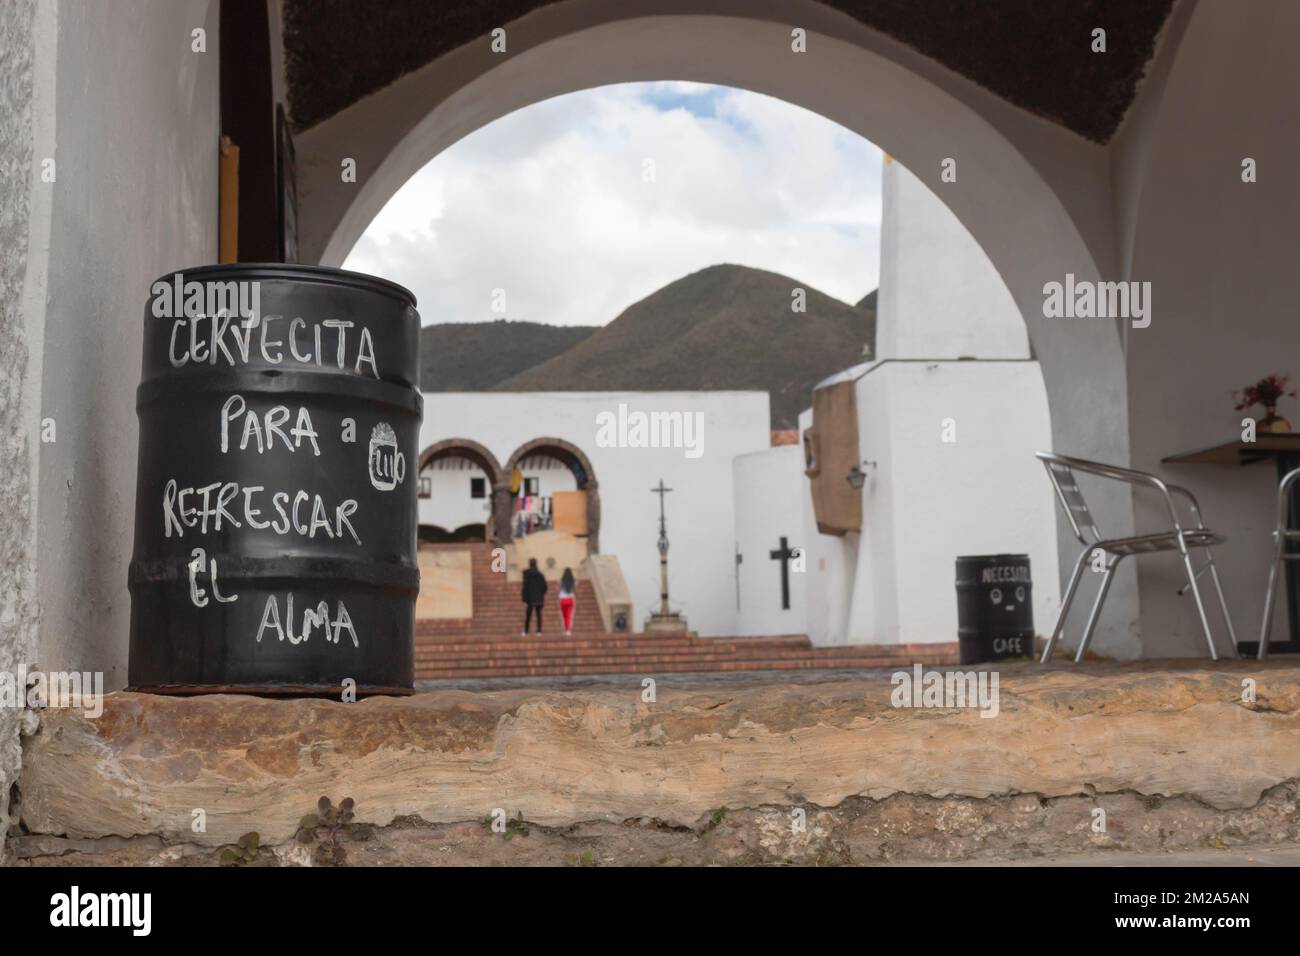 GUATAVITA, COLOMBIA - A leyend in spanish language about happines and beer writing in a black barrel of a guatavita town restaurant Stock Photo